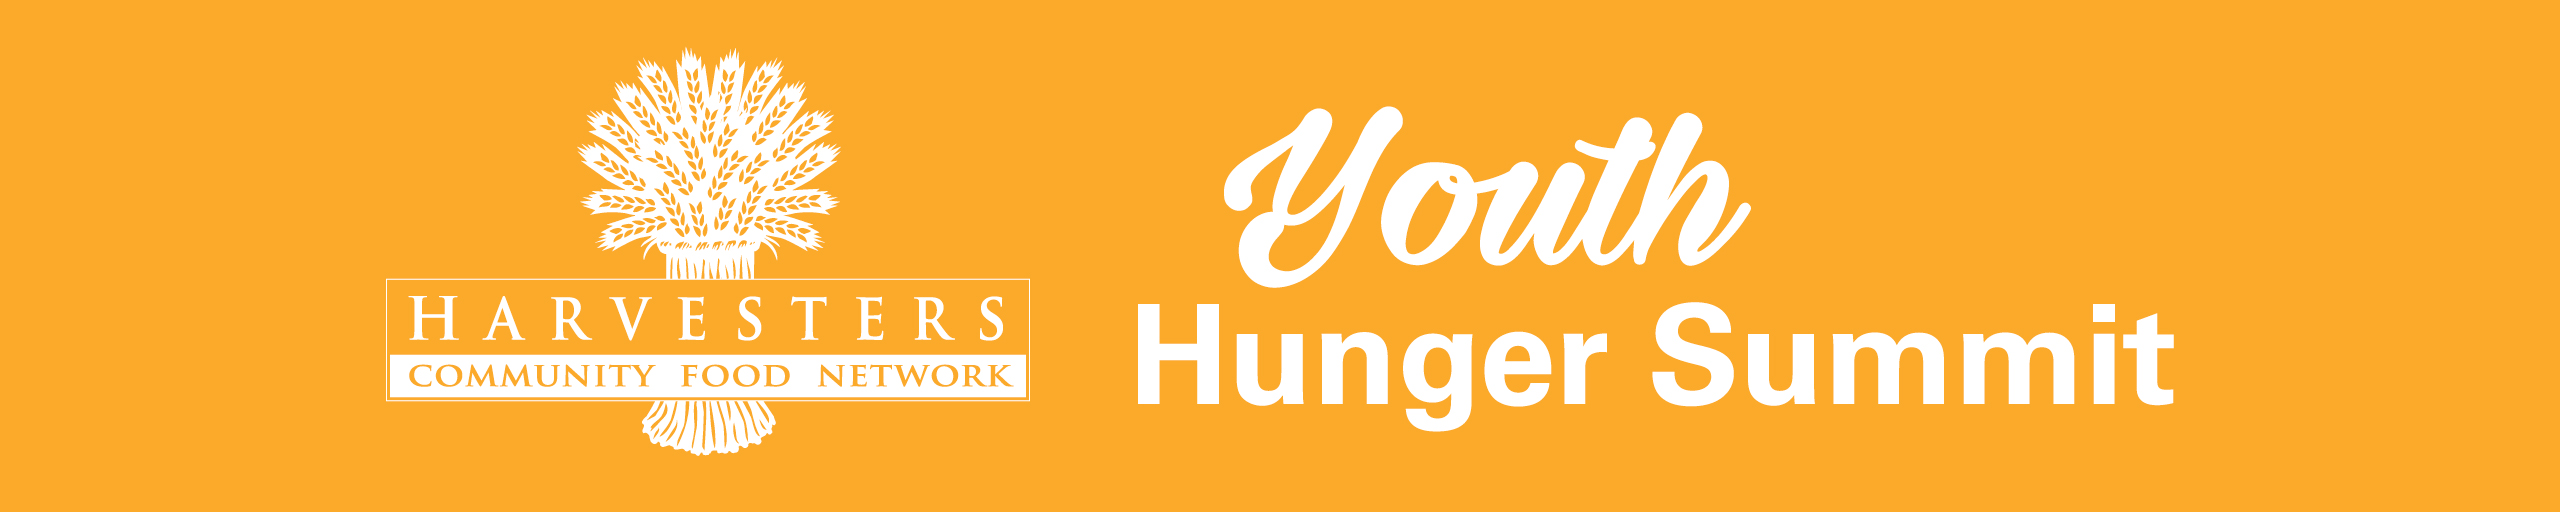 Harvesters Youth Hunger Summit
